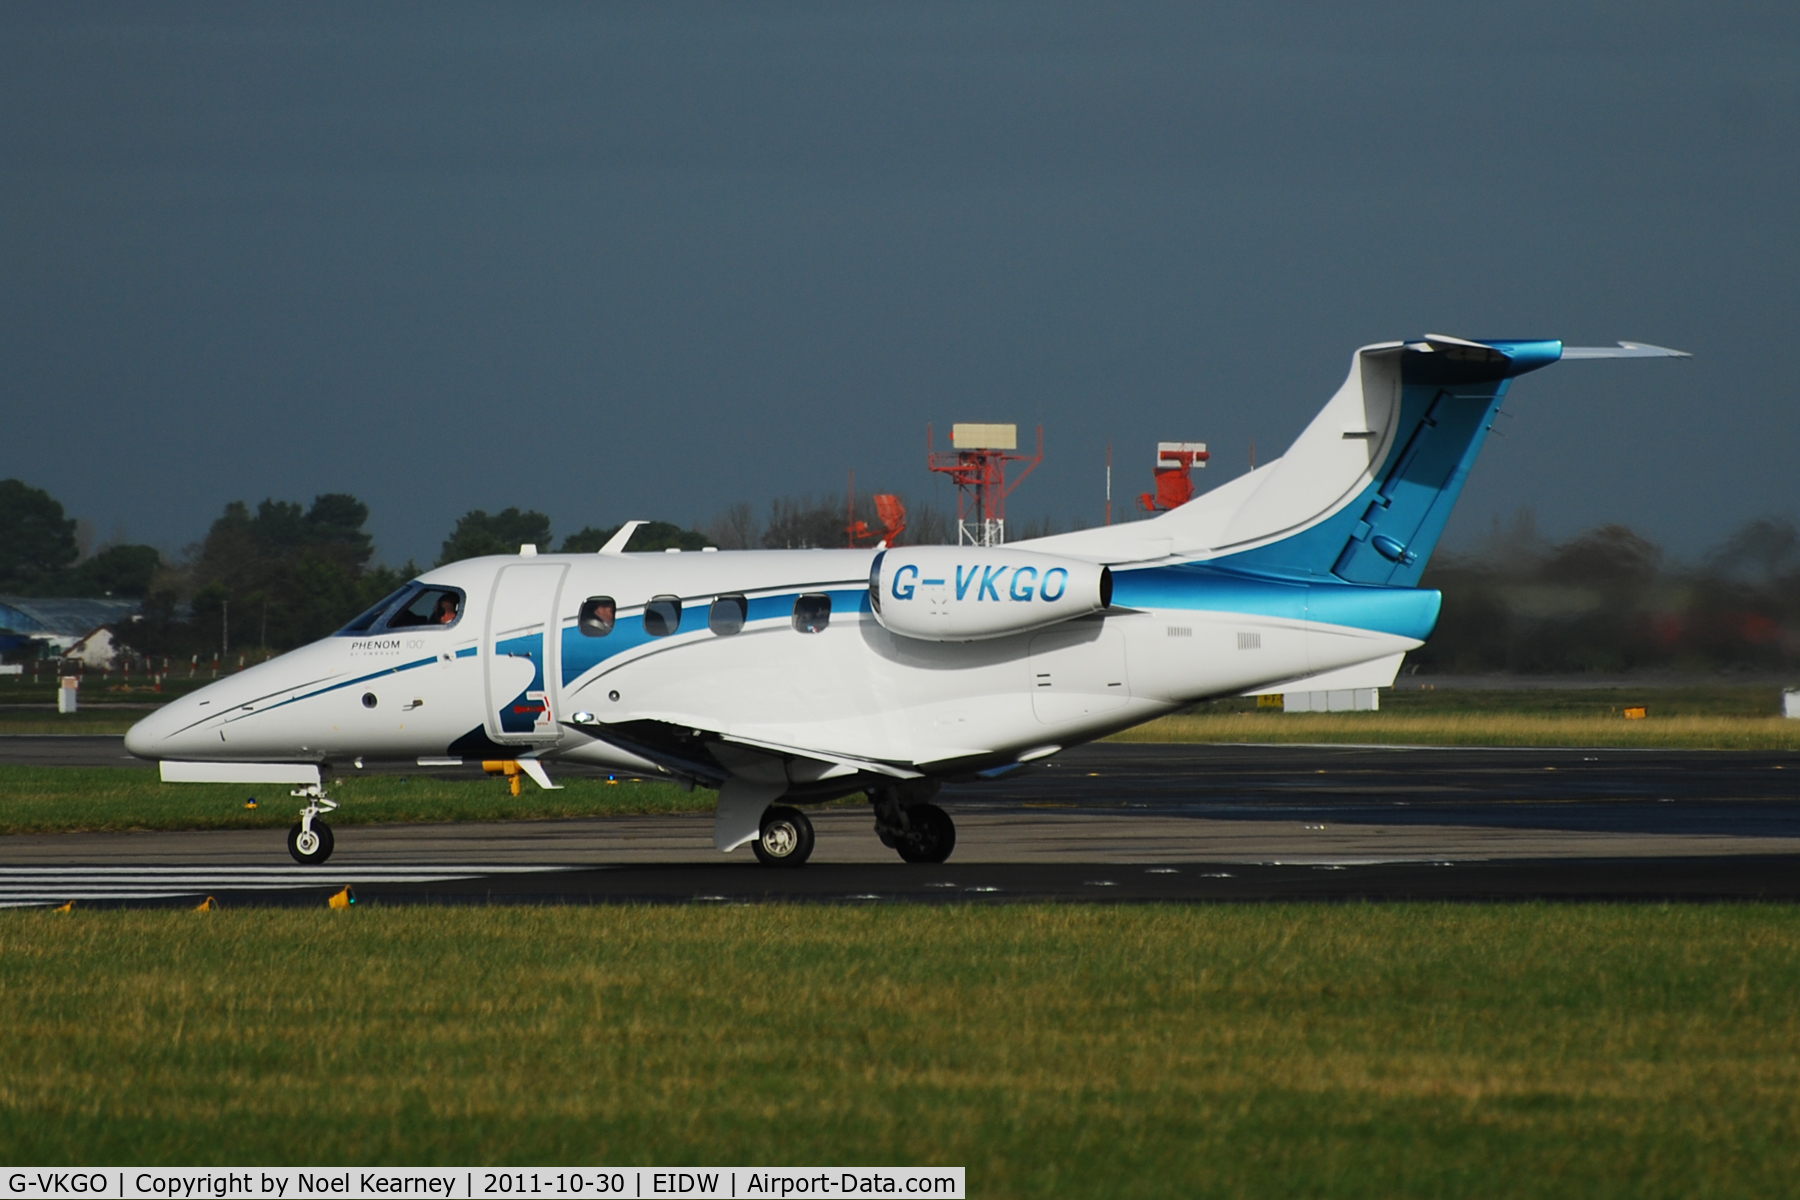 G-VKGO, 2010 Embraer EMB-500 Phenom 100 C/N 50000145, ex M-KICK. This Phenom is seen about to depart off Rwy 28 at EIDW.